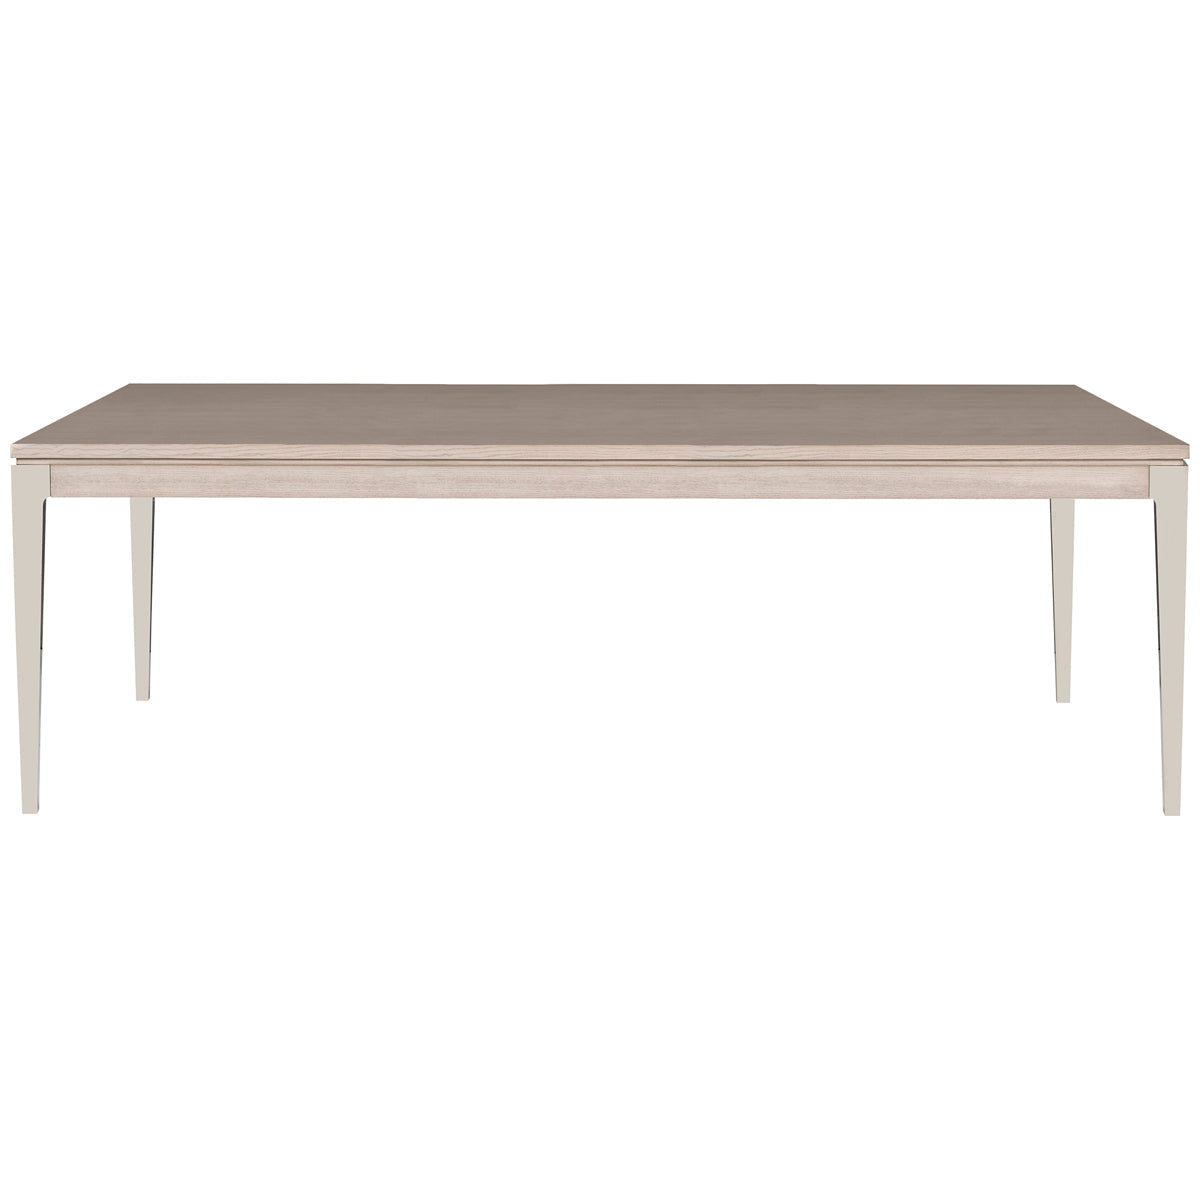 Vanguard Furniture Metal Tapered Dining Table with Metal Tapered Leg